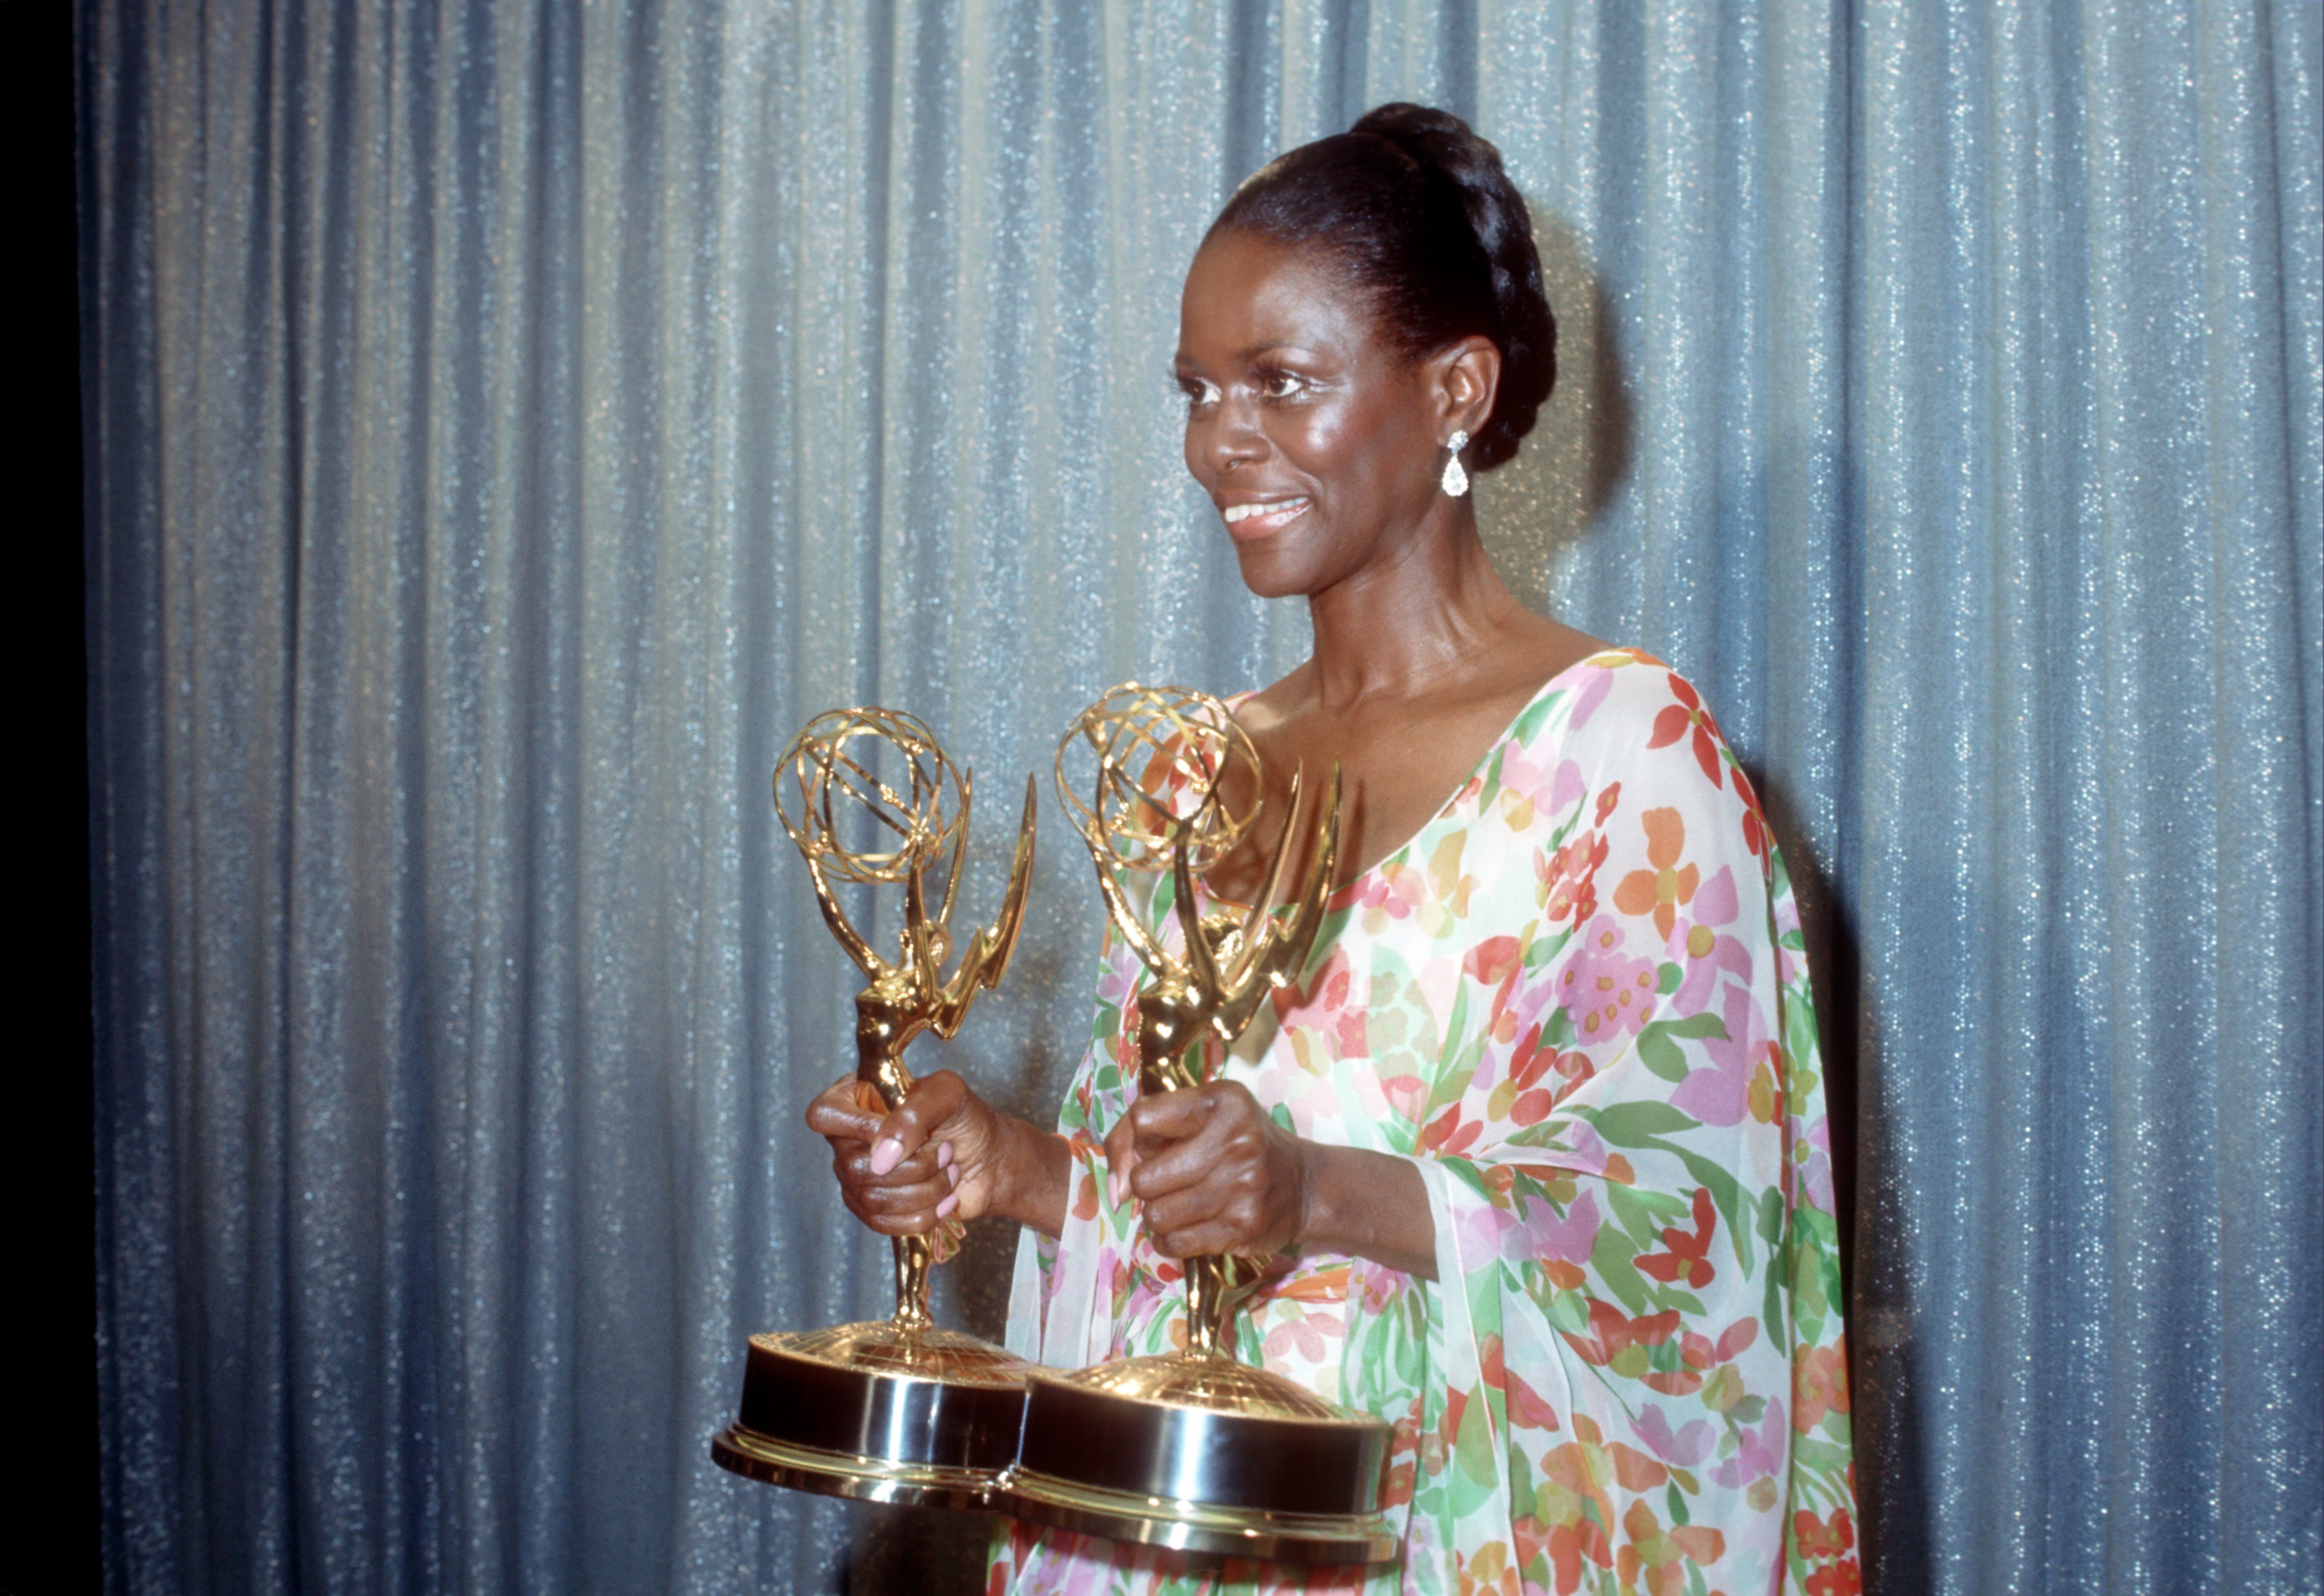 LOS ANGELES - MAY 28: Actress Cicely Tyson holds the two Emmy Awards that she won for her performance in "The Autobiography Of Miss Jane Pittman" on May 28, 1974 in Los Angeles, California.